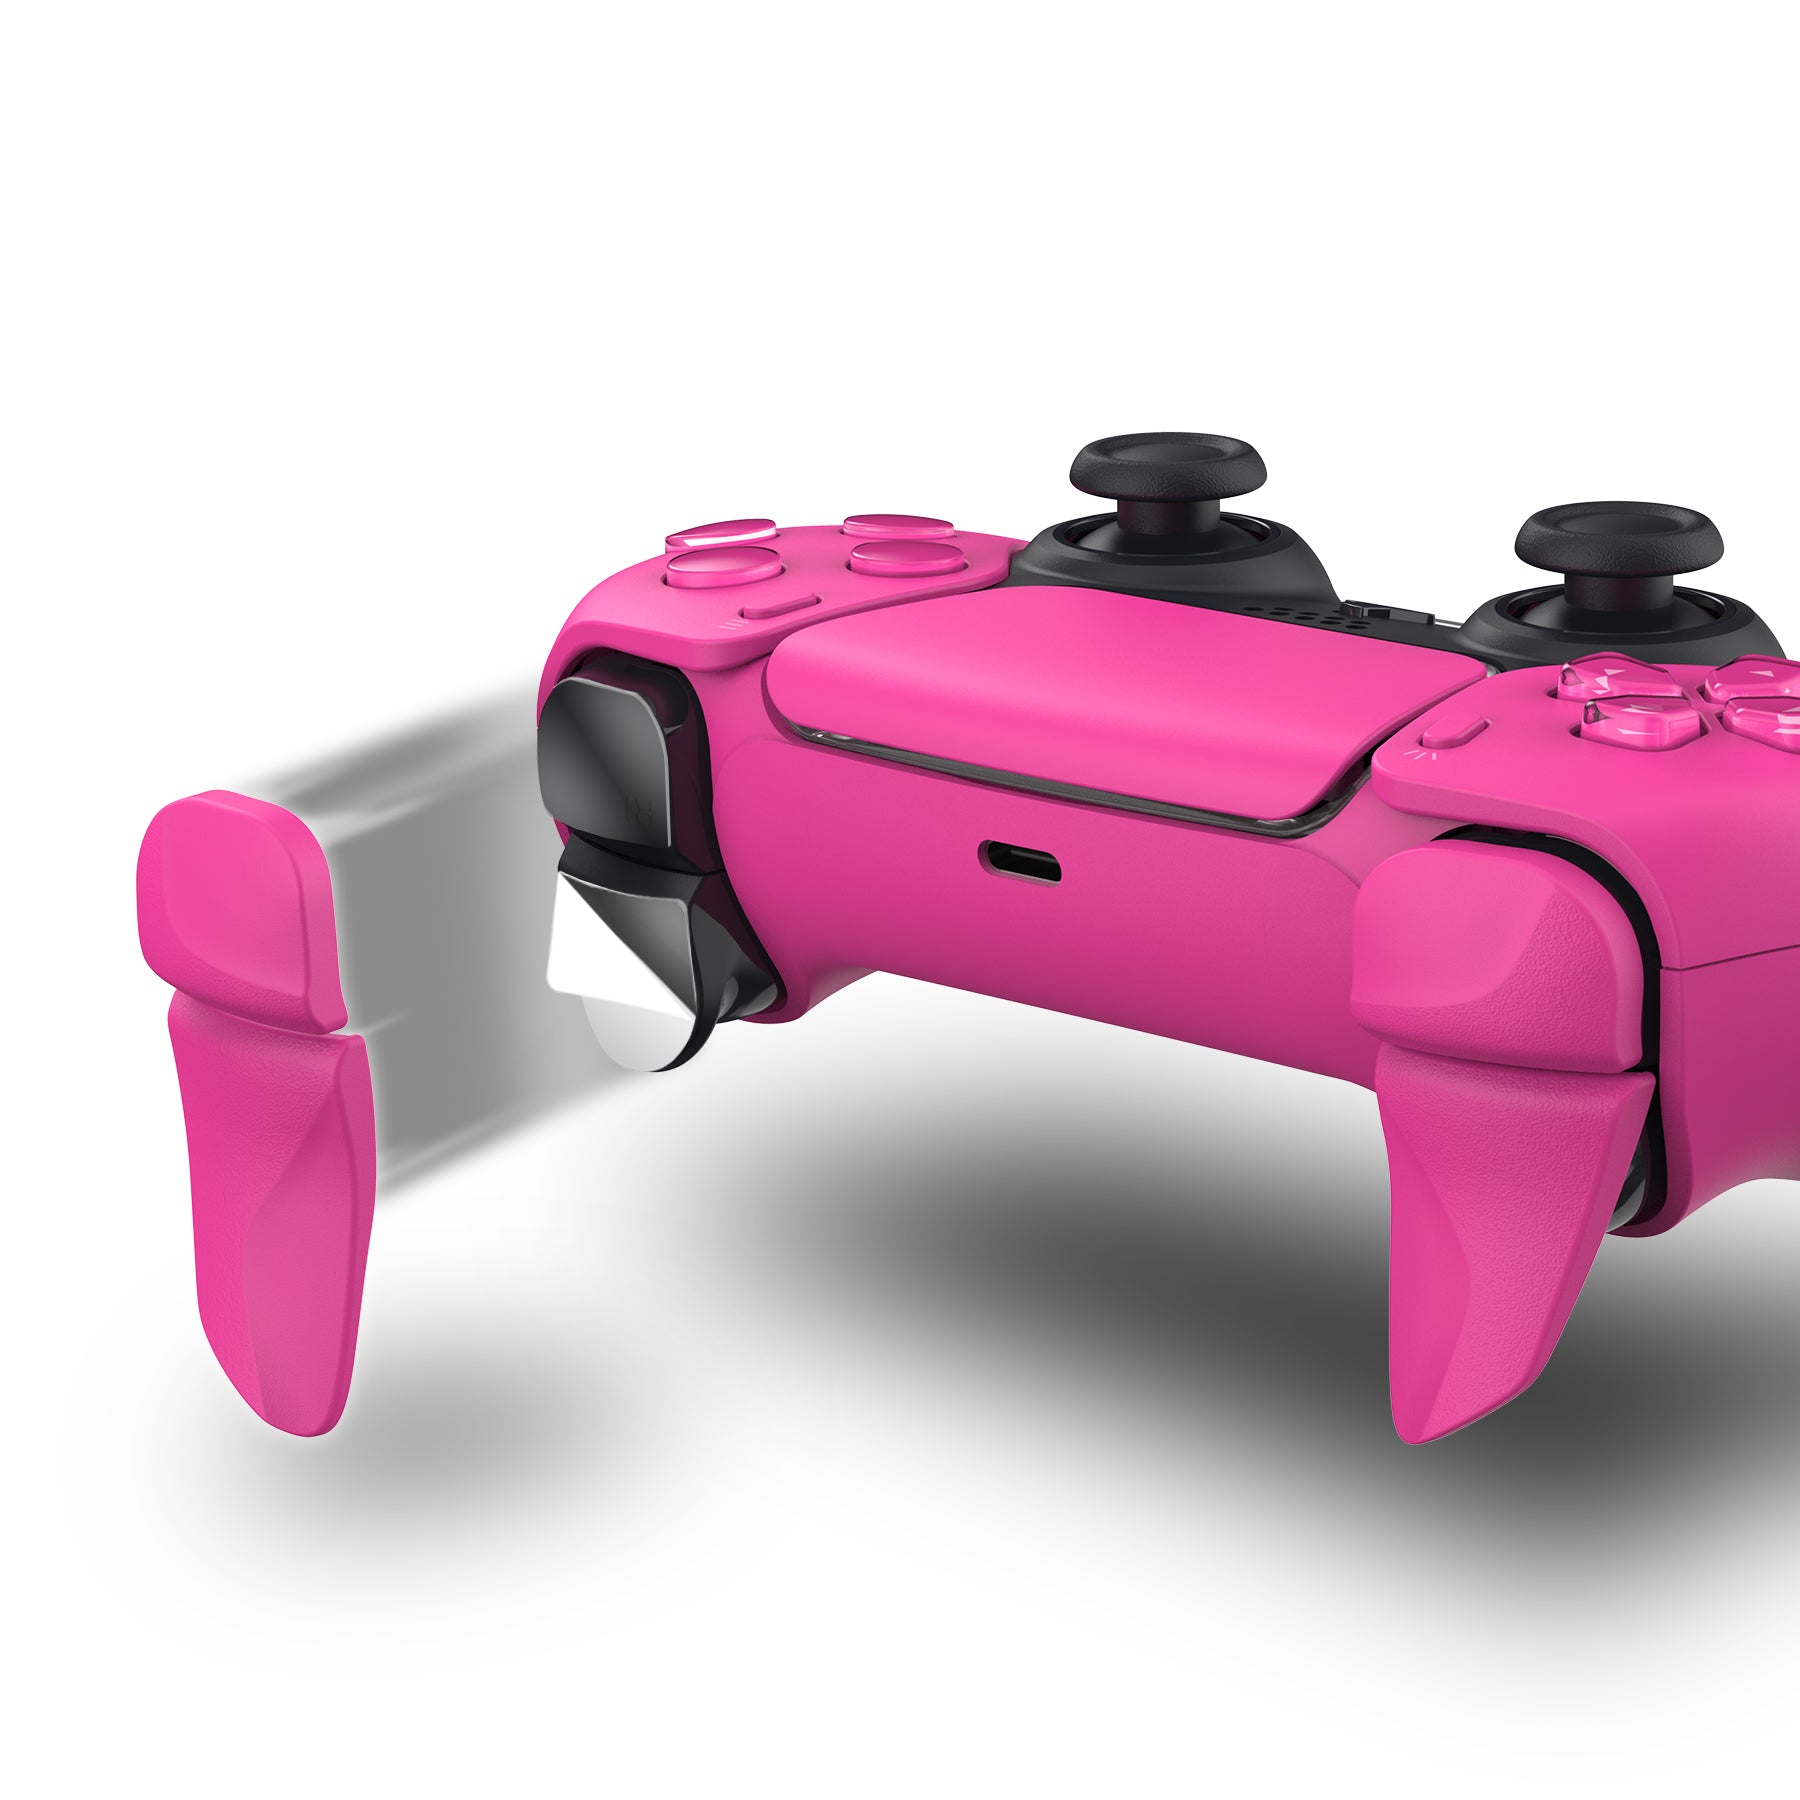 PlayVital Nova Pink 2 Pair Shoulder Buttons Extension Triggers for PS5 Controller, Game Improvement Adjusters for PS5 Controller, Bumper Trigger Extenders for PS5 Controller - PFPJ088 PlayVital